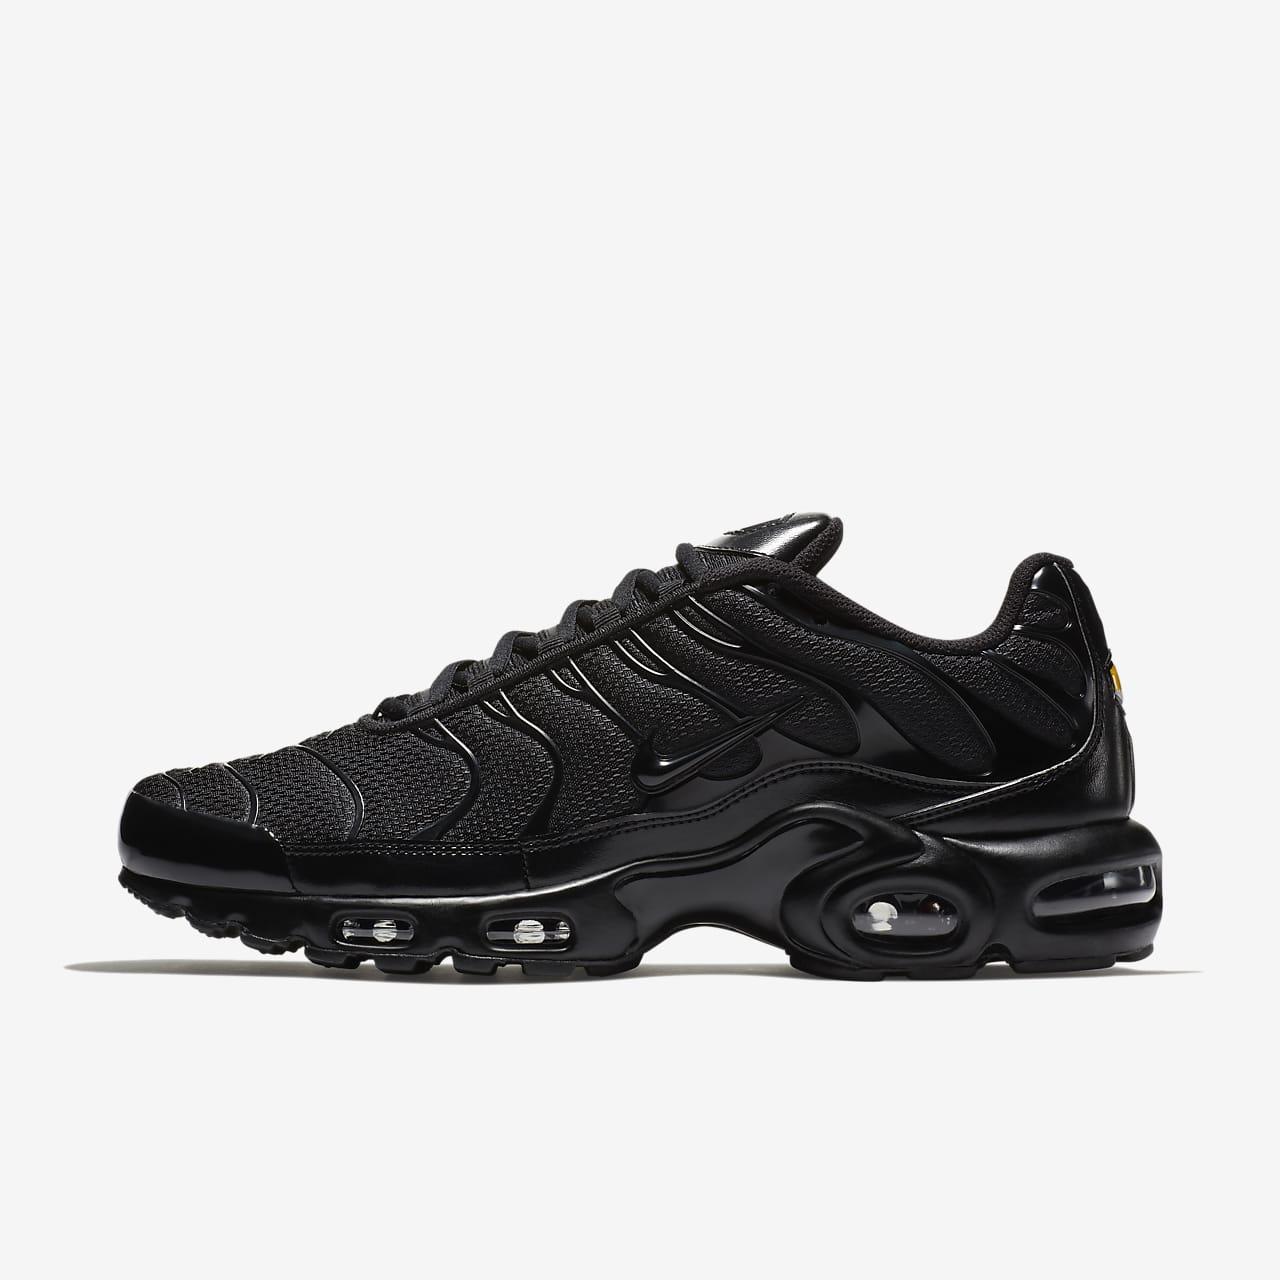 Air Max 95 Plus Best Sale, UP TO 70% OFF